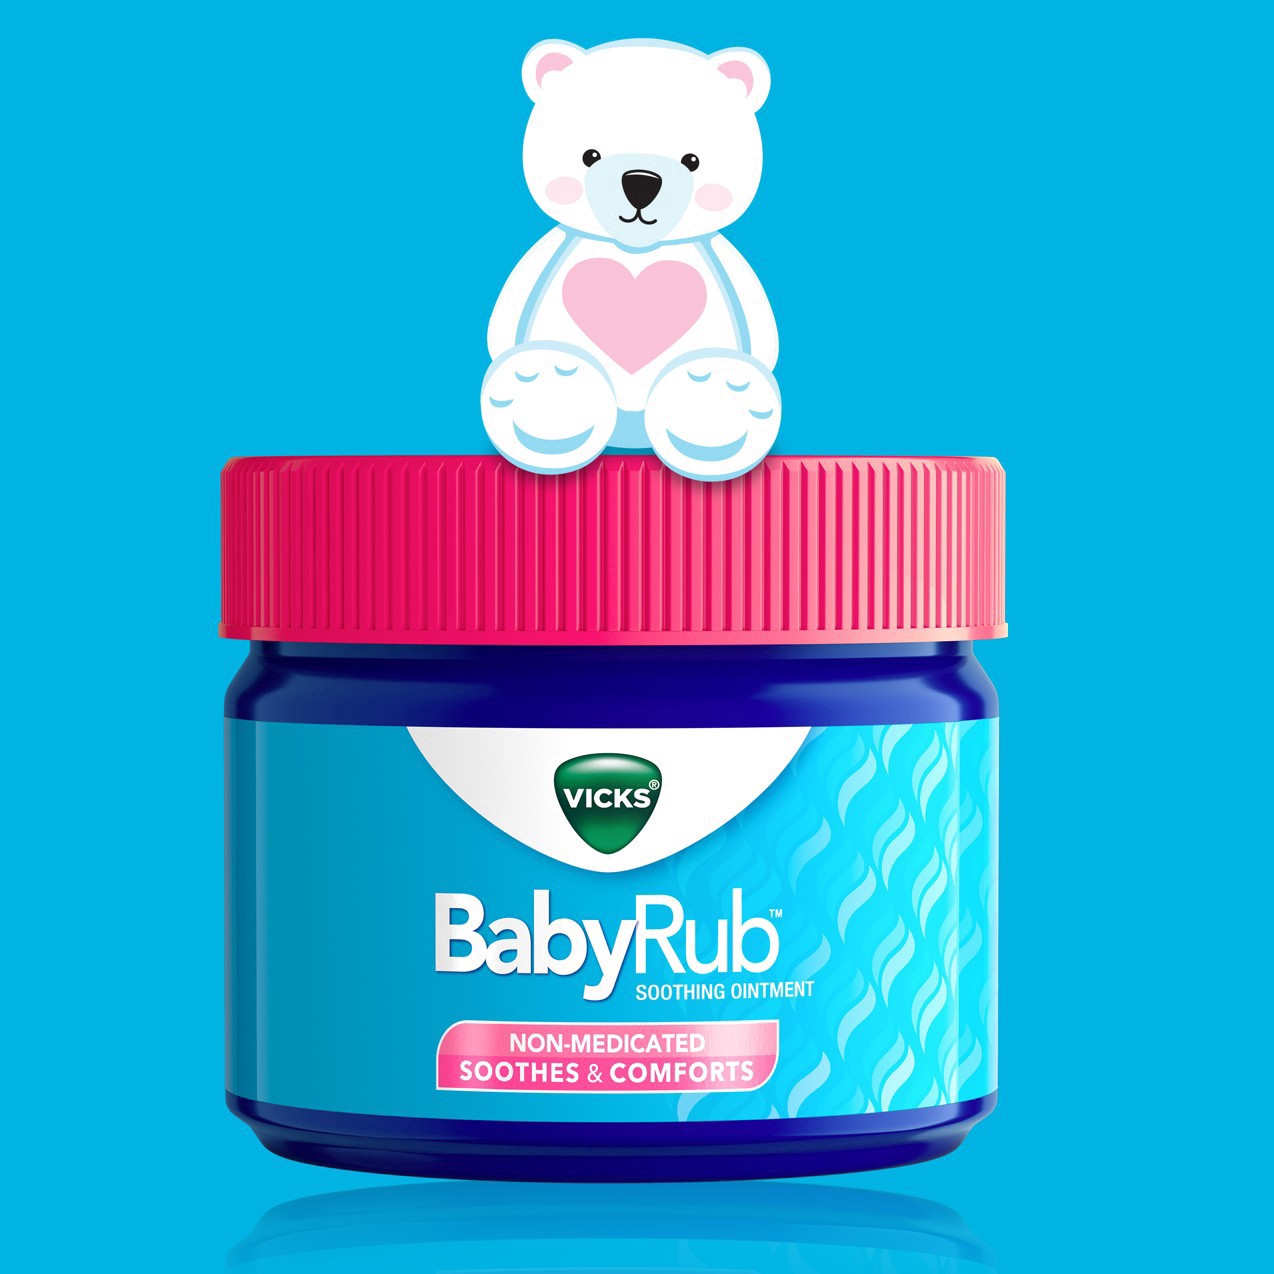 slide 34 of 78, Vicks BabyRub, Chest Rub Ointment with Soothing Aloe, Eucalyptus, Lavender, and Rosemary, from The Makers of VapoRub, 1.76 oz, 1.76 oz